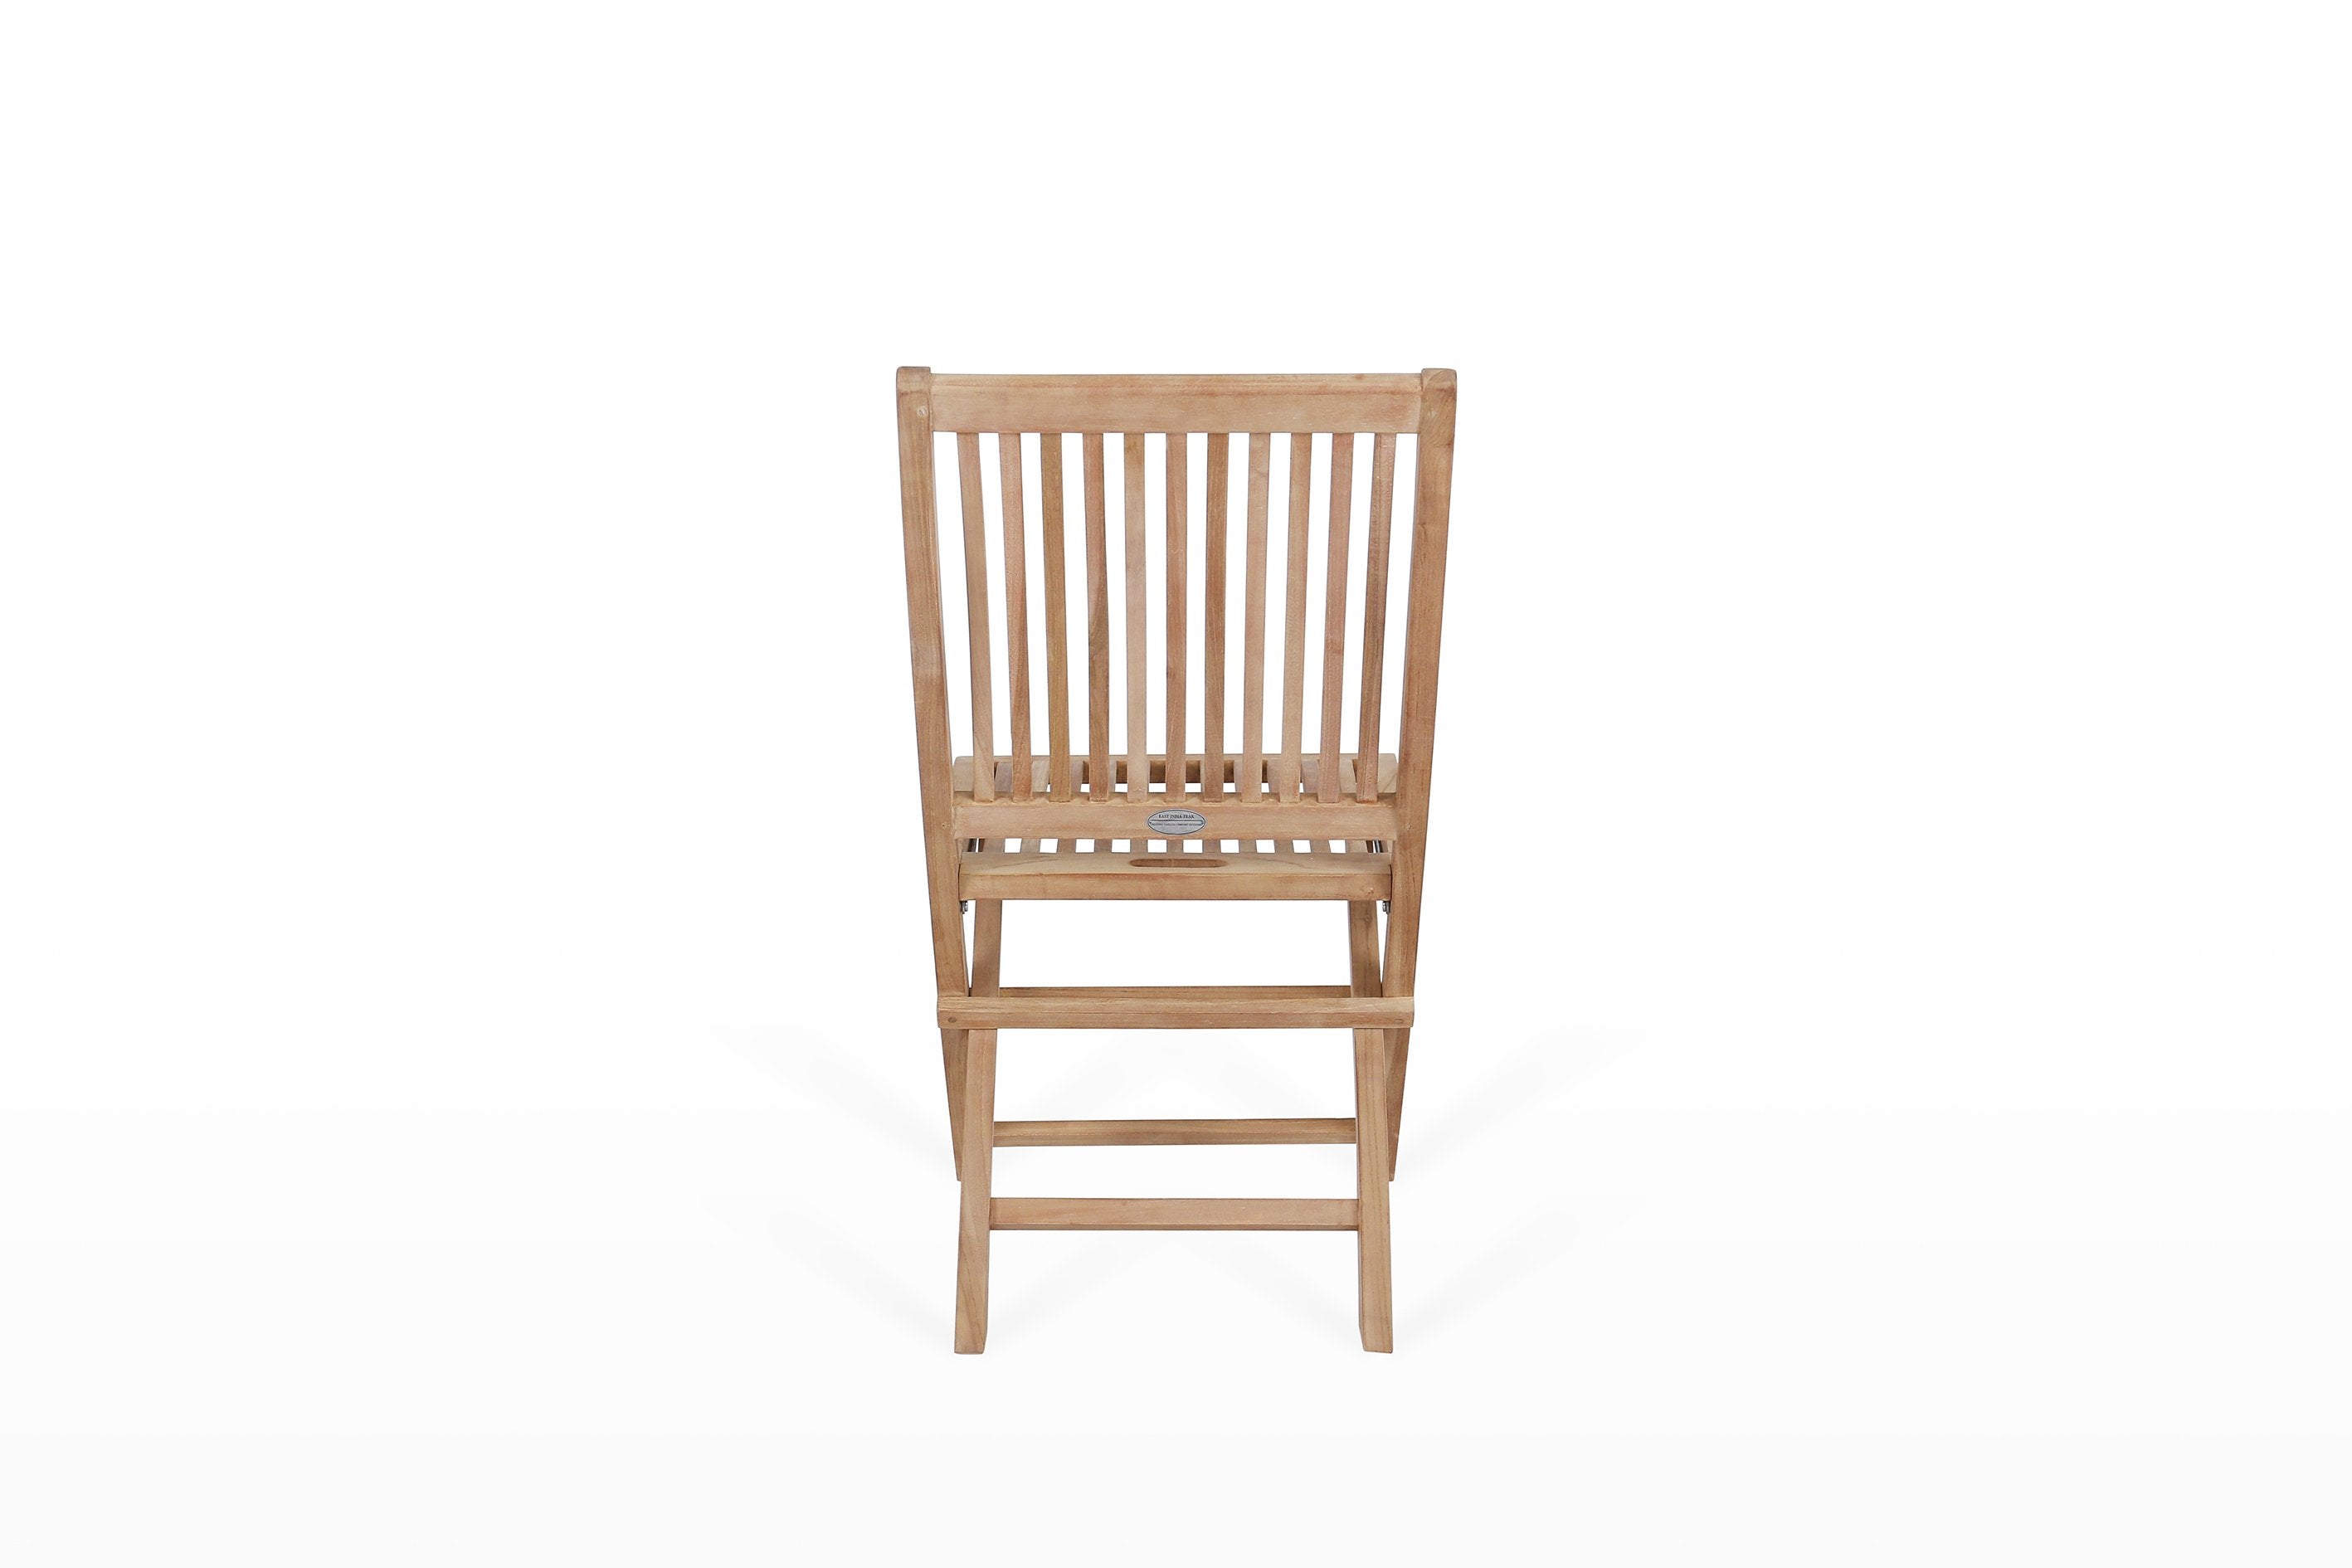 East India Madeira Folding Chair - Tucker Barbecues